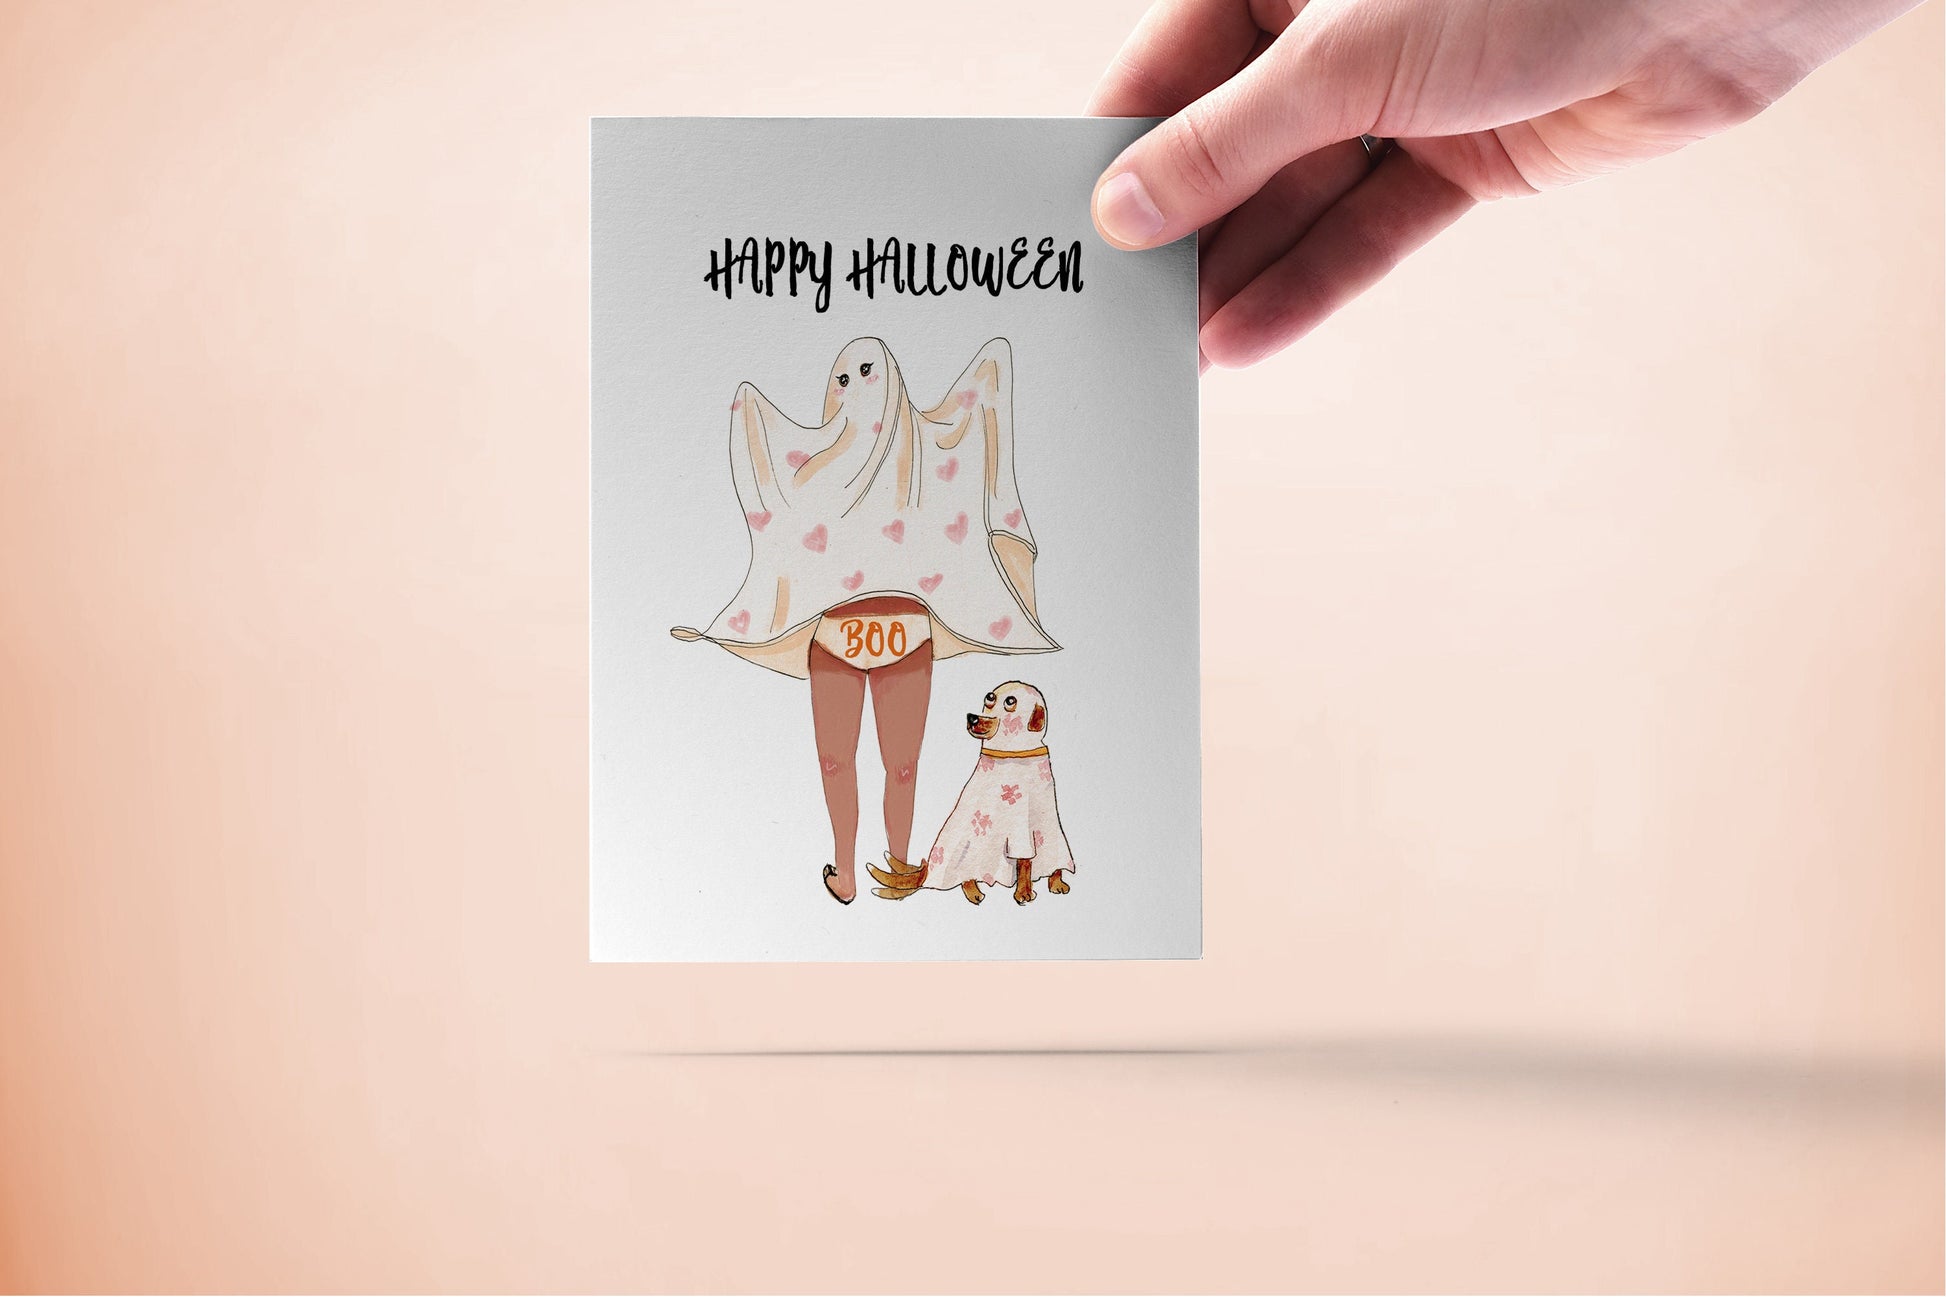 Funny Halloween Cards For Boyfriend - Boo Booty Love Card From Girlfriend